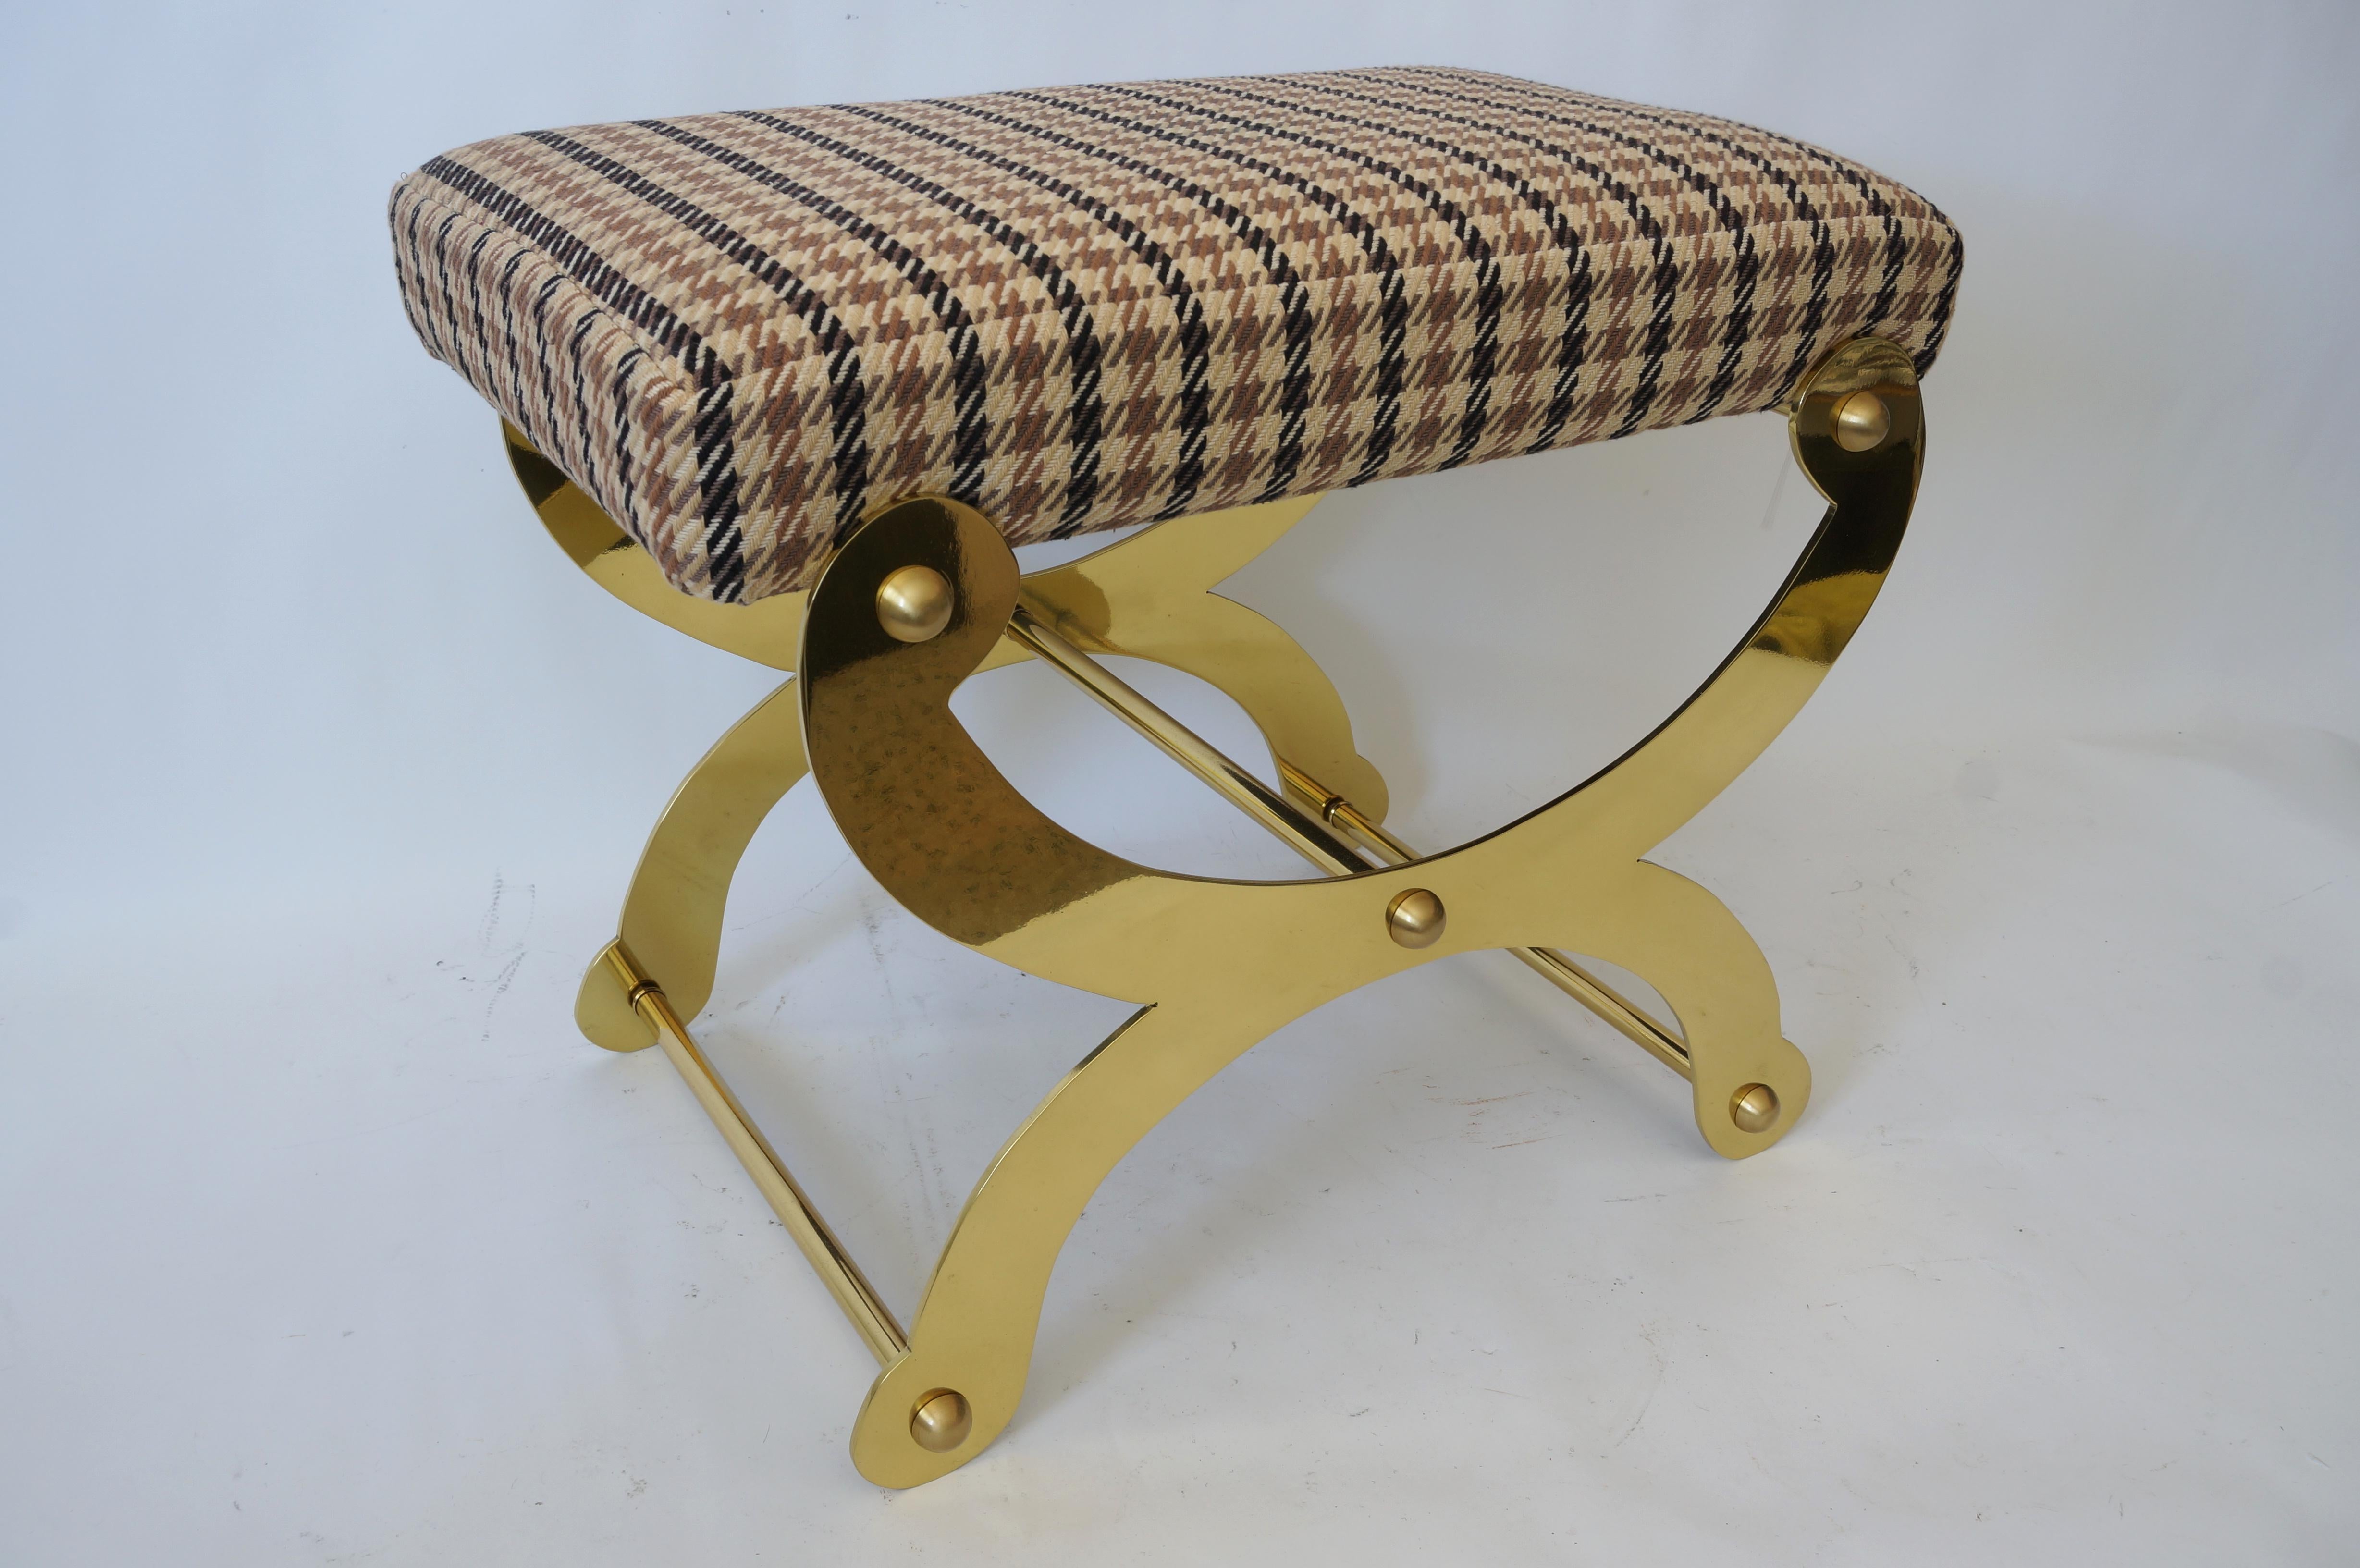 This stylish and chic campaign style, curule-form bench has been professionally polished and lacquered and reupholstered in a woven hounds-tooth fabric.

Note: The piece is all solid brass and polished, and the photos show dark reflections from